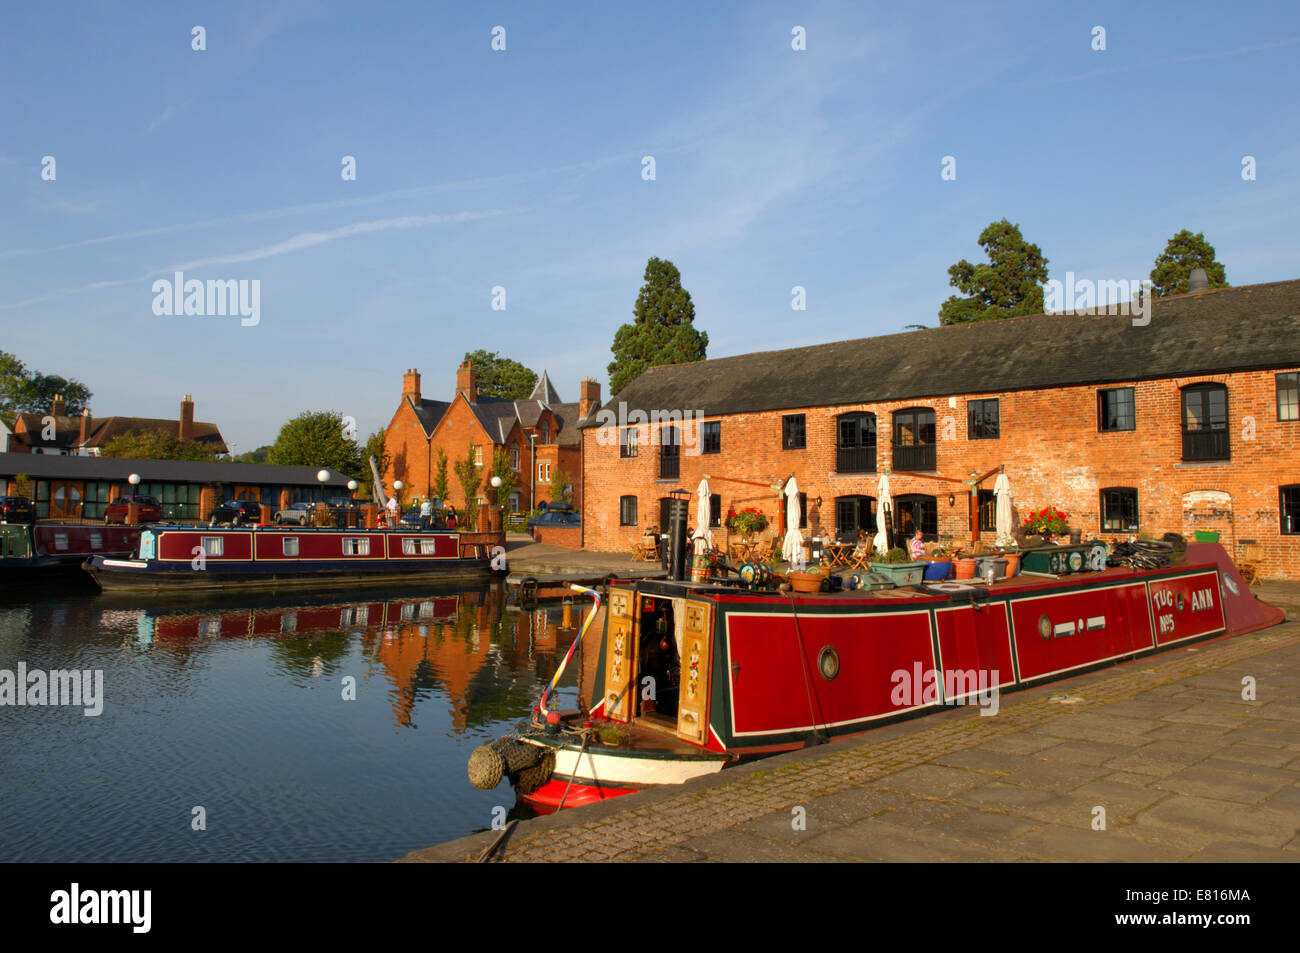 The Union Wharf canal basin in Market Harborough, Leicestershire, England Stock Photo